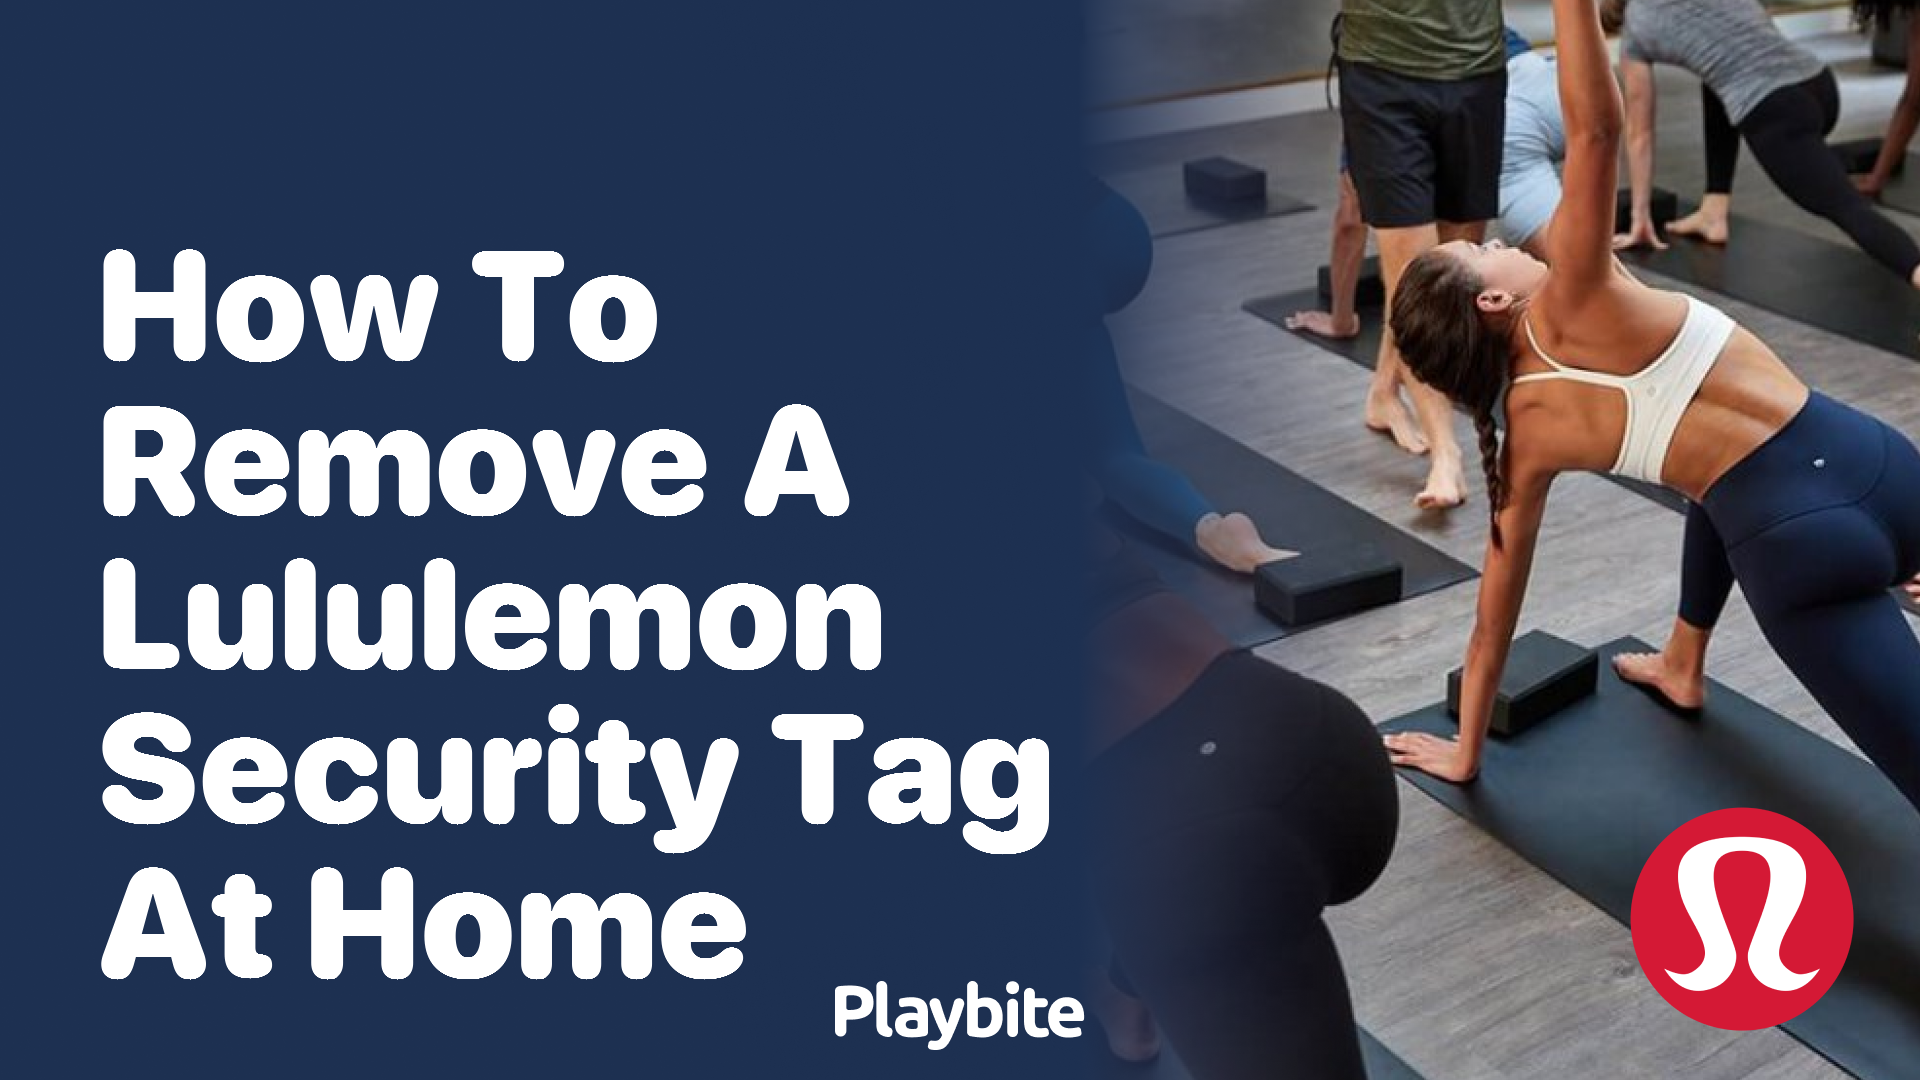 Are You Supposed to Remove the Lululemon Tag? - Playbite